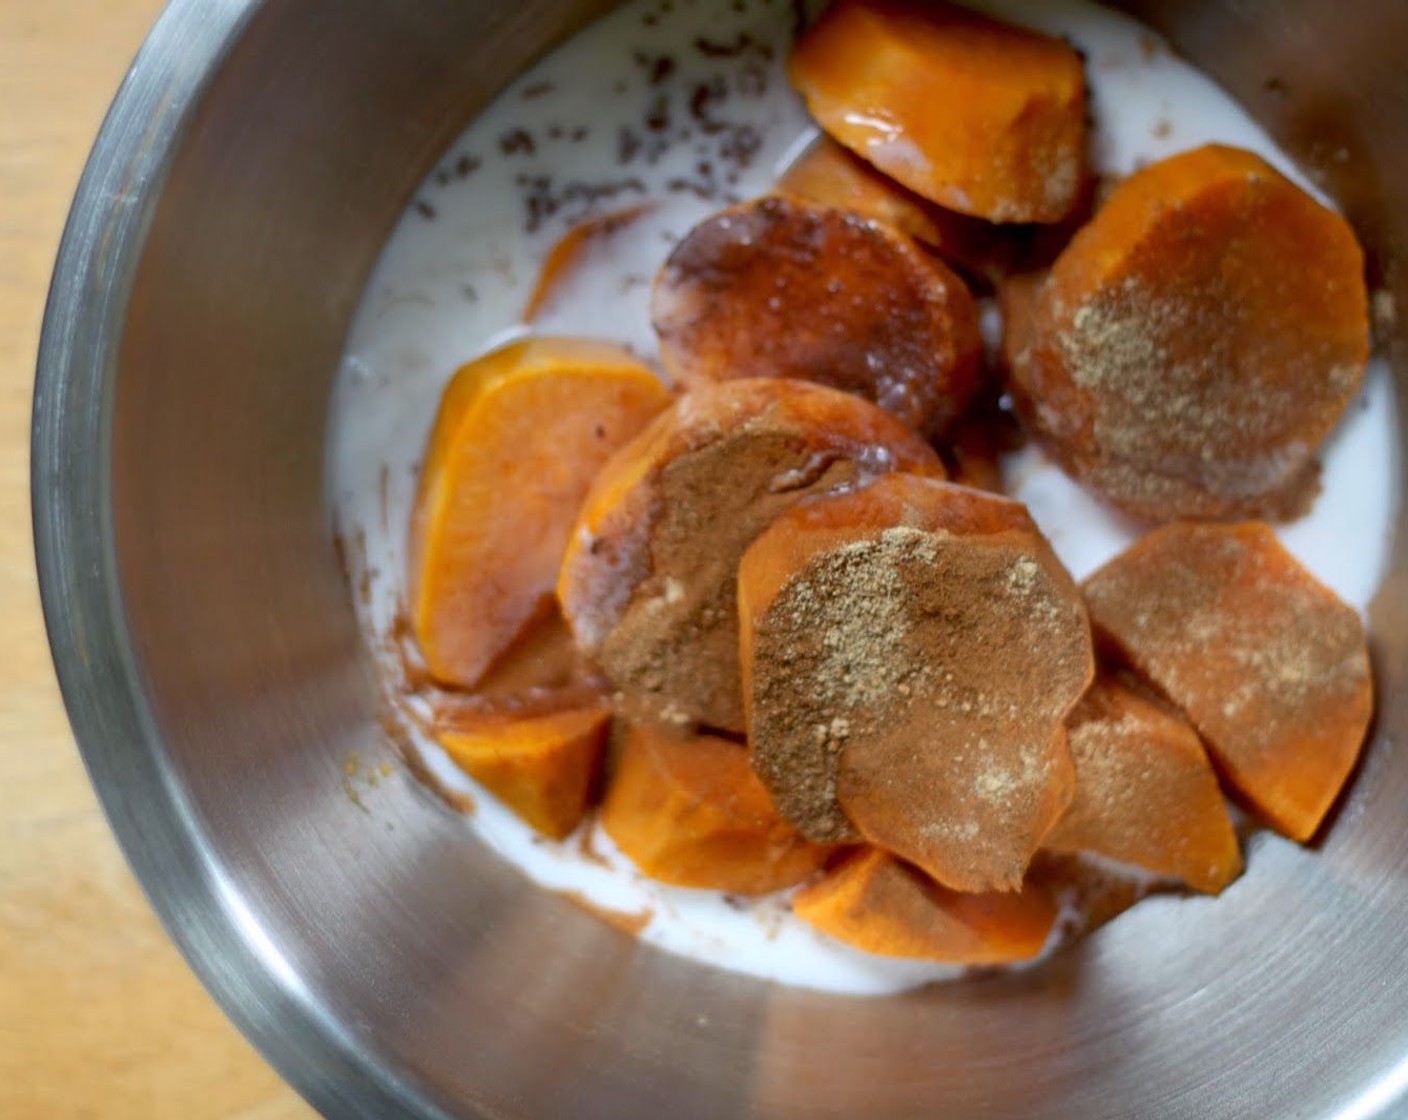 step 8 For the filling, drain and mash the sweet potatoes together with the Light Coconut Milk (3/4 cup), Ground Cinnamon (1 tsp), Ground Ginger (1/2 tsp), Ground Nutmeg (1/4 tsp), Salt (1/4 tsp), and Ground Cloves (1 pinch).